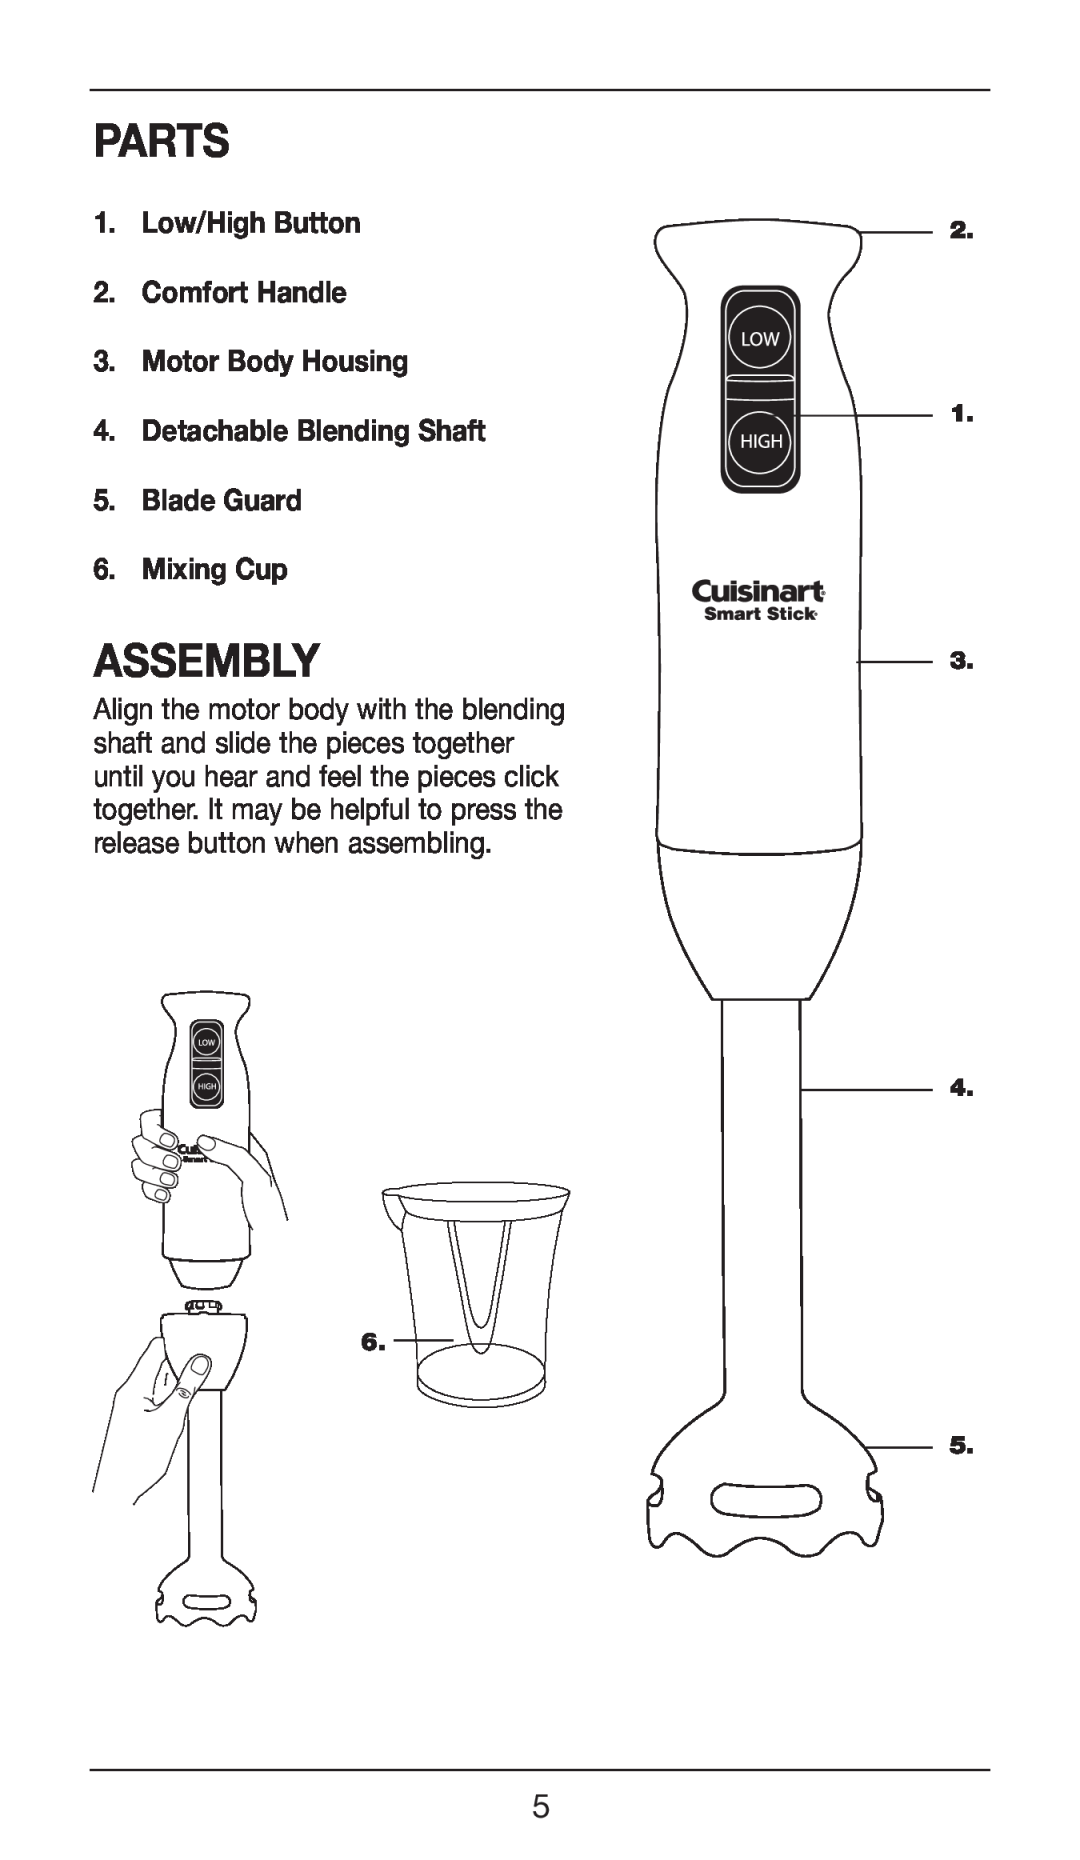 Cuisinart CSB-75 manual Parts, Assembly, Low/High Button 2. Comfort Handle 3. Motor Body Housing 